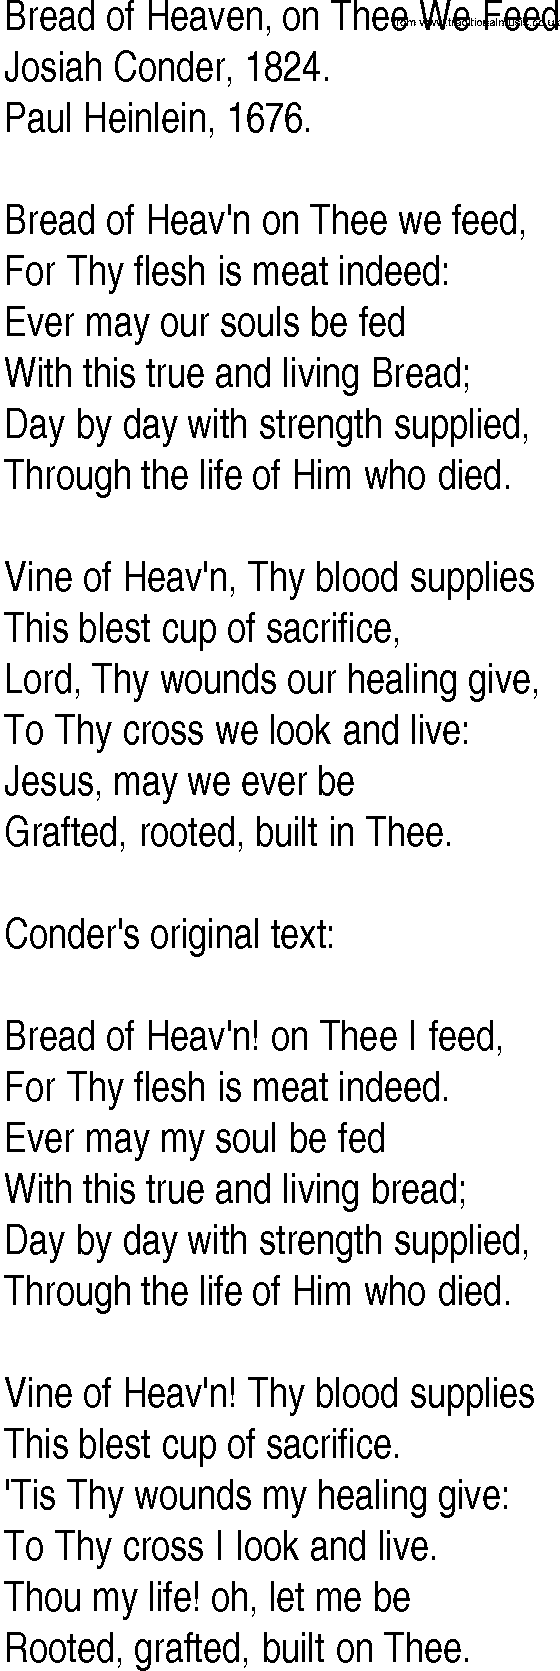 Hymn and Gospel Song: Bread of Heaven, on Thee We Feed by Josiah Conder lyrics